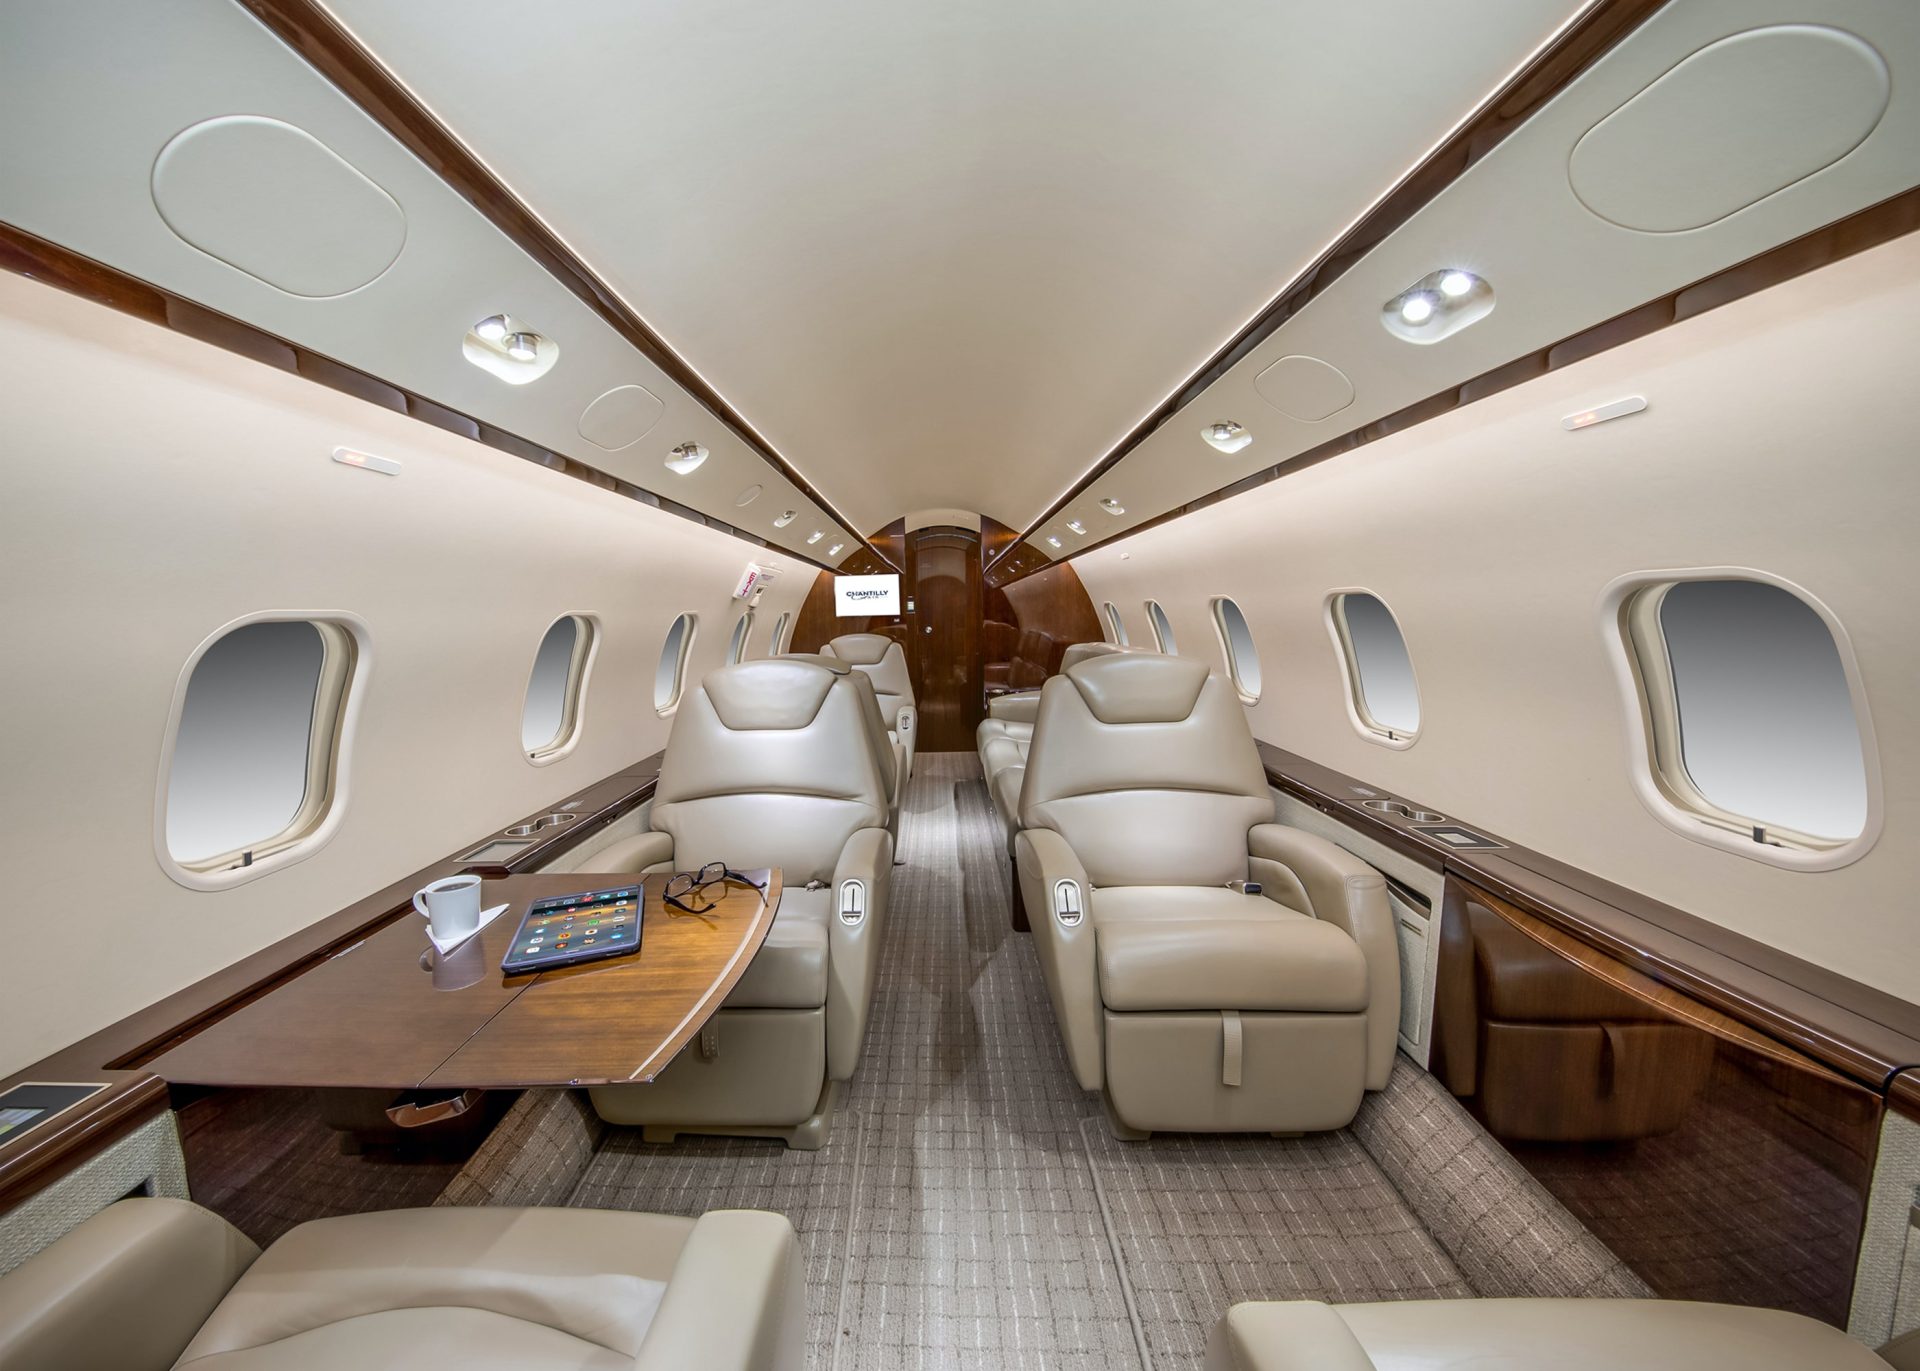 Seating on the Challenger 300